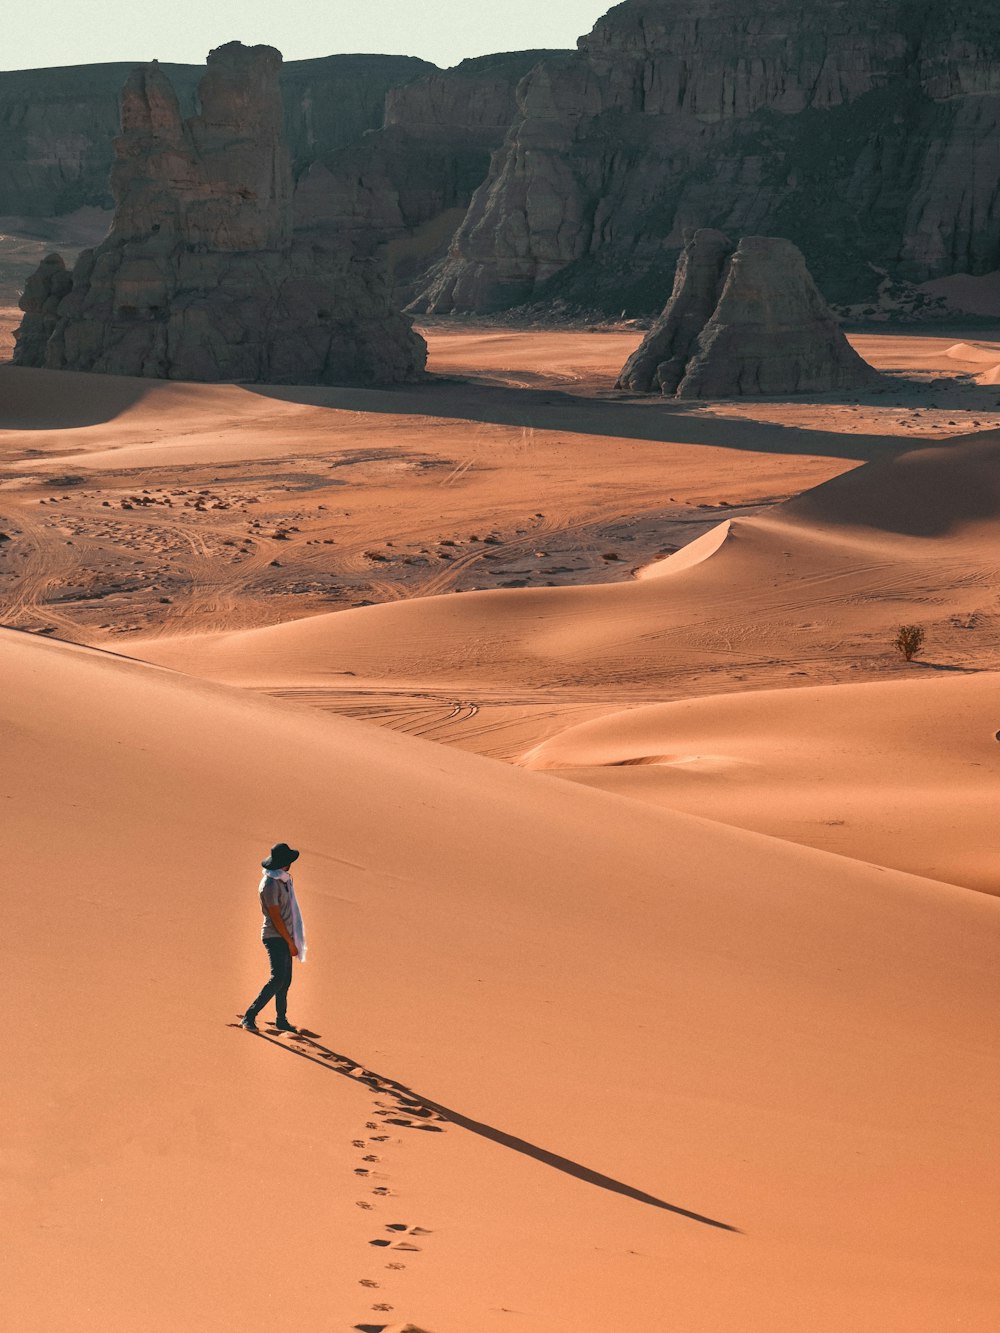 a person walking across a desert with mountains in the background